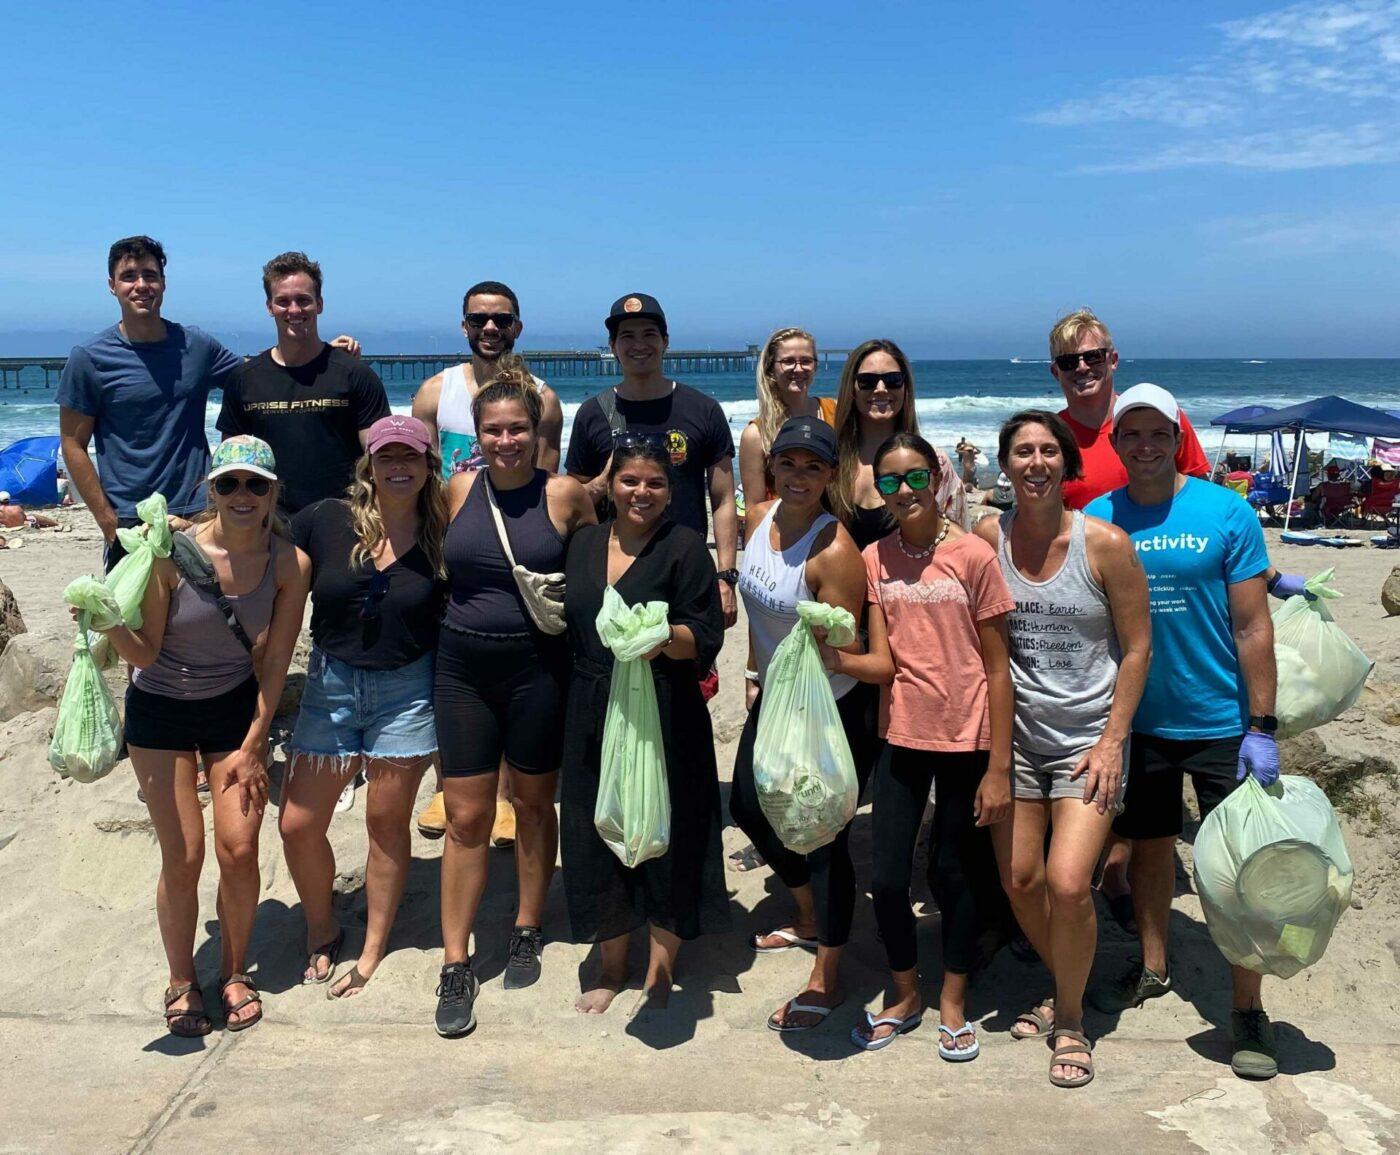 ClickUp crew cleans the beaches of San Diego